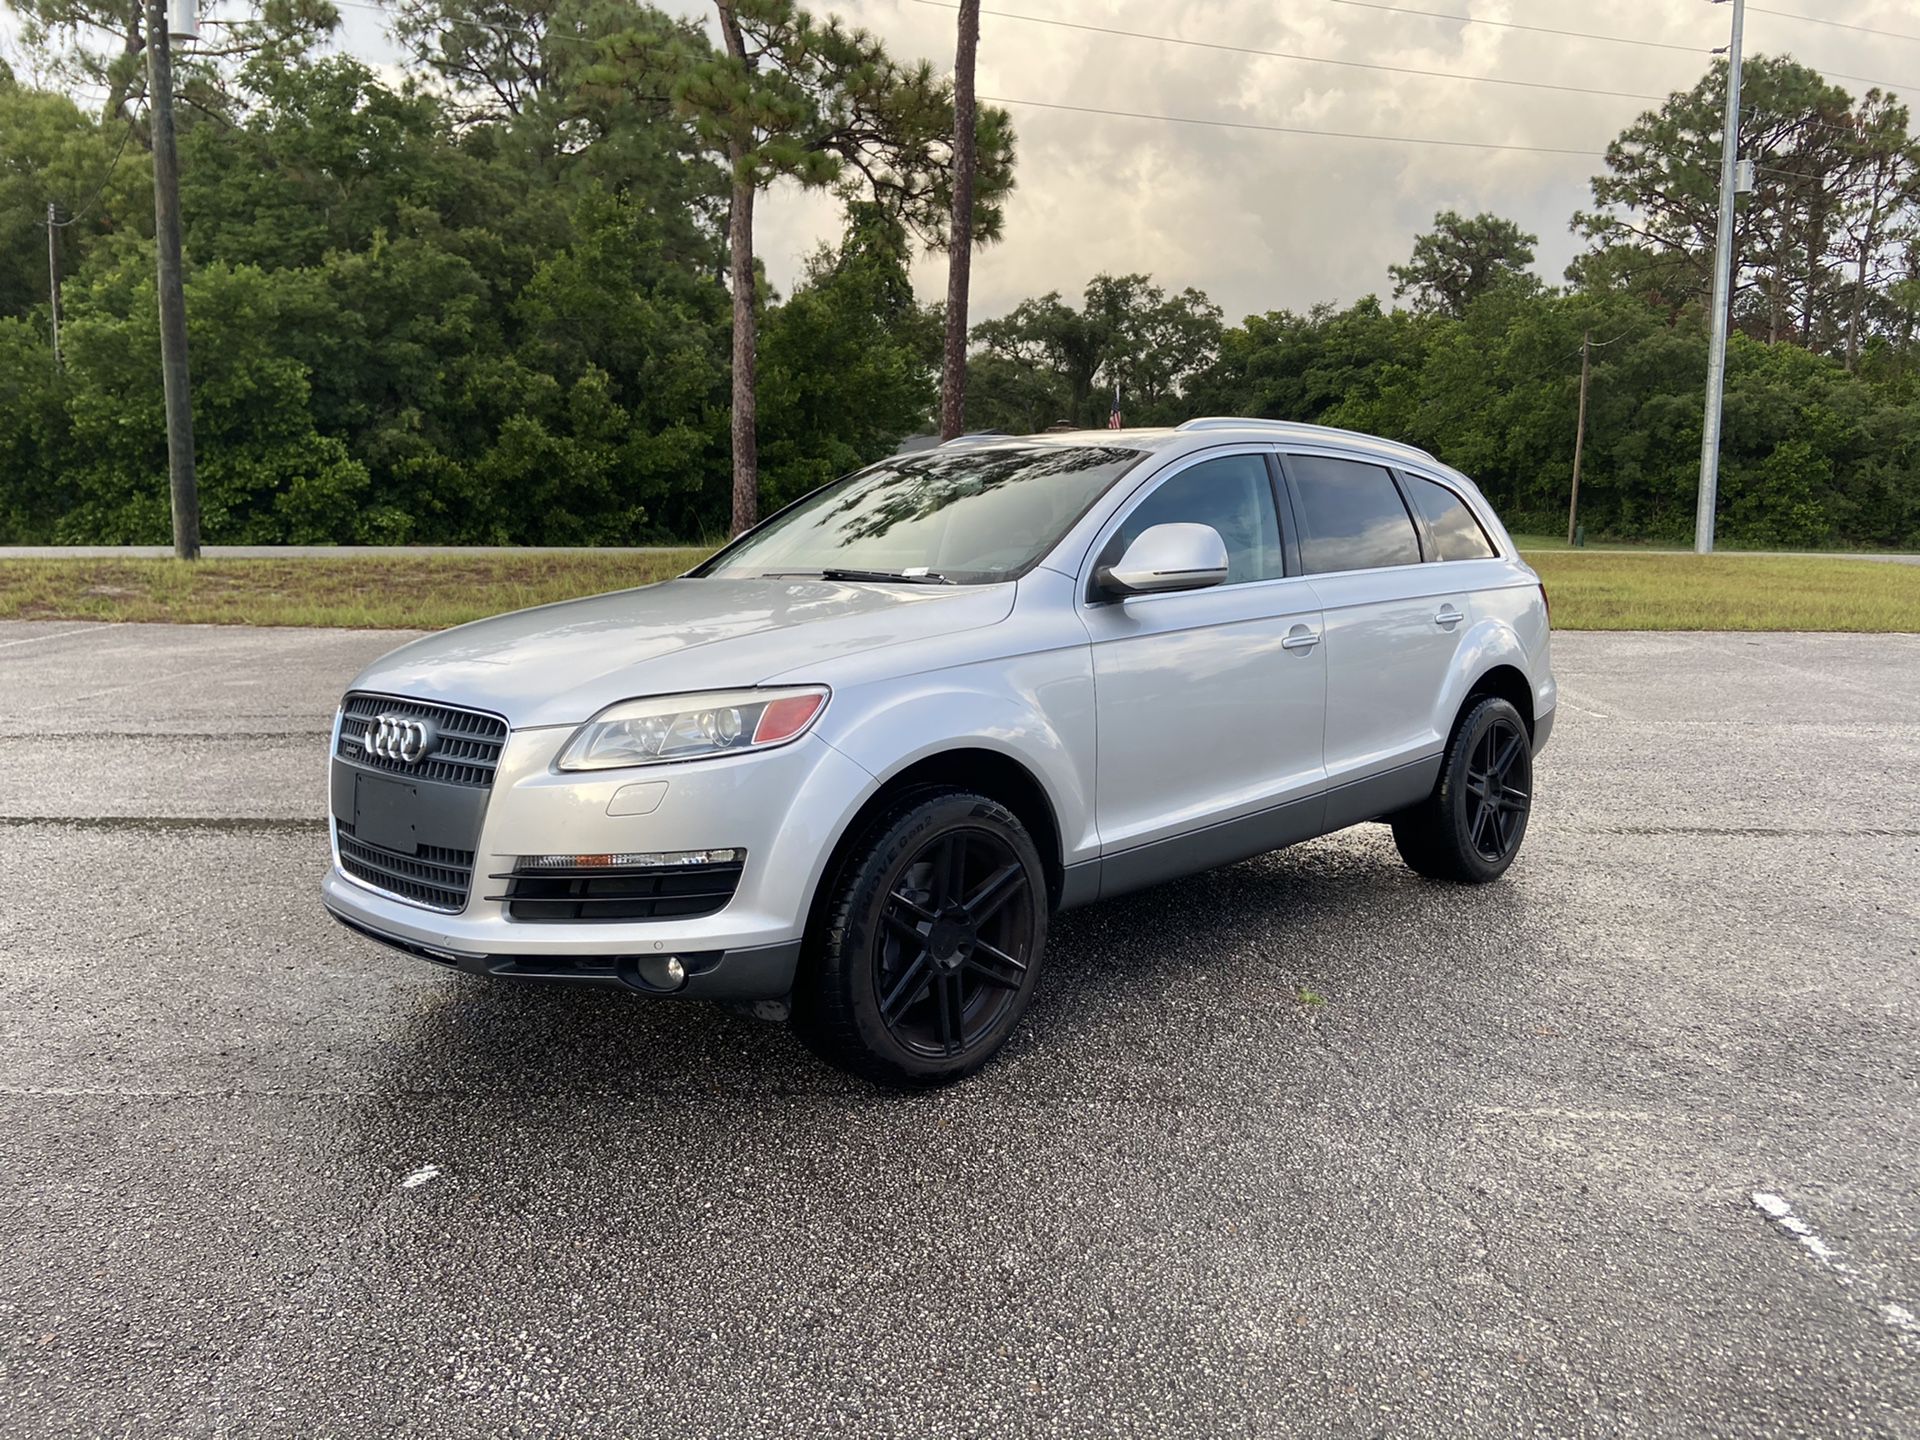 2008 Audi Q7 premium sport with 128k miles- I finance good or bad credit/ Self employed at $200 per month.